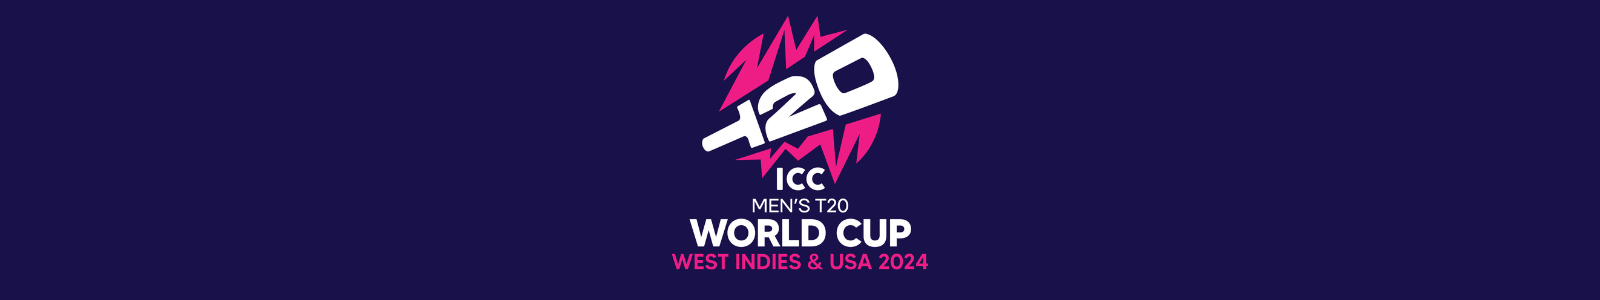 ICC MEN'S T20 WORLD CUP USA 2024